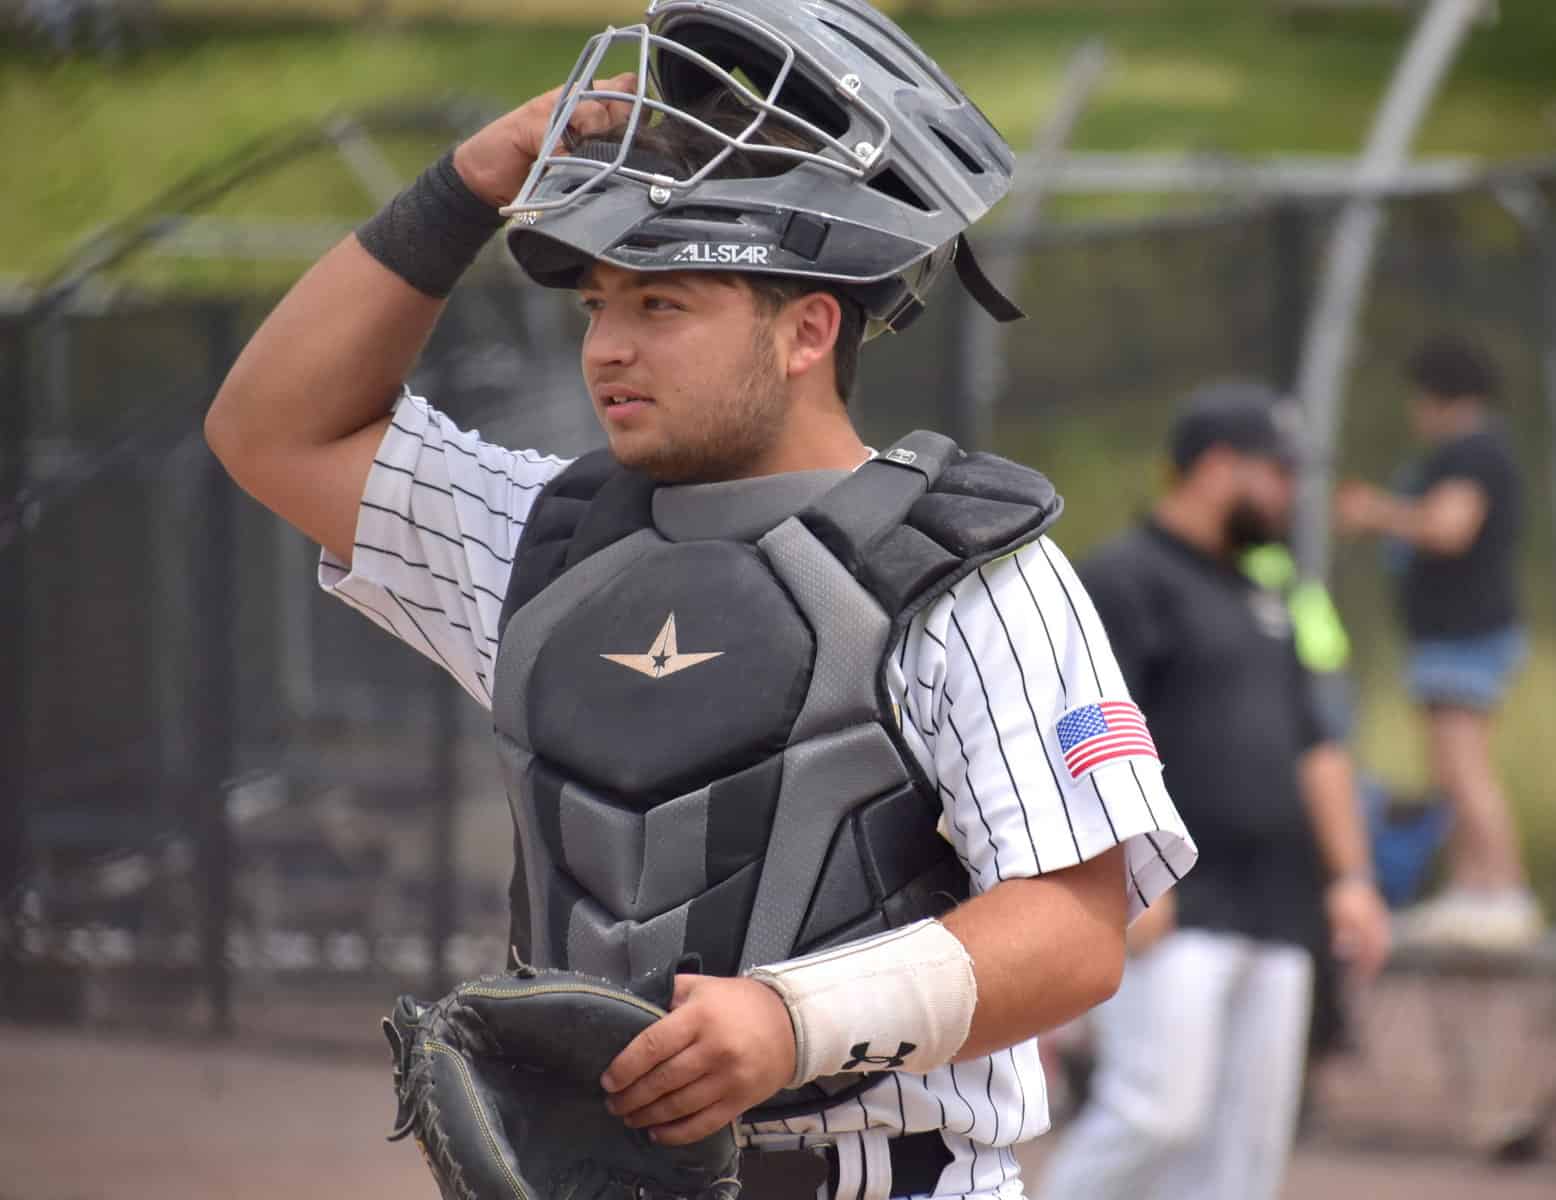 Neumann-Goretti’s Gallo shining on both sides of the plate